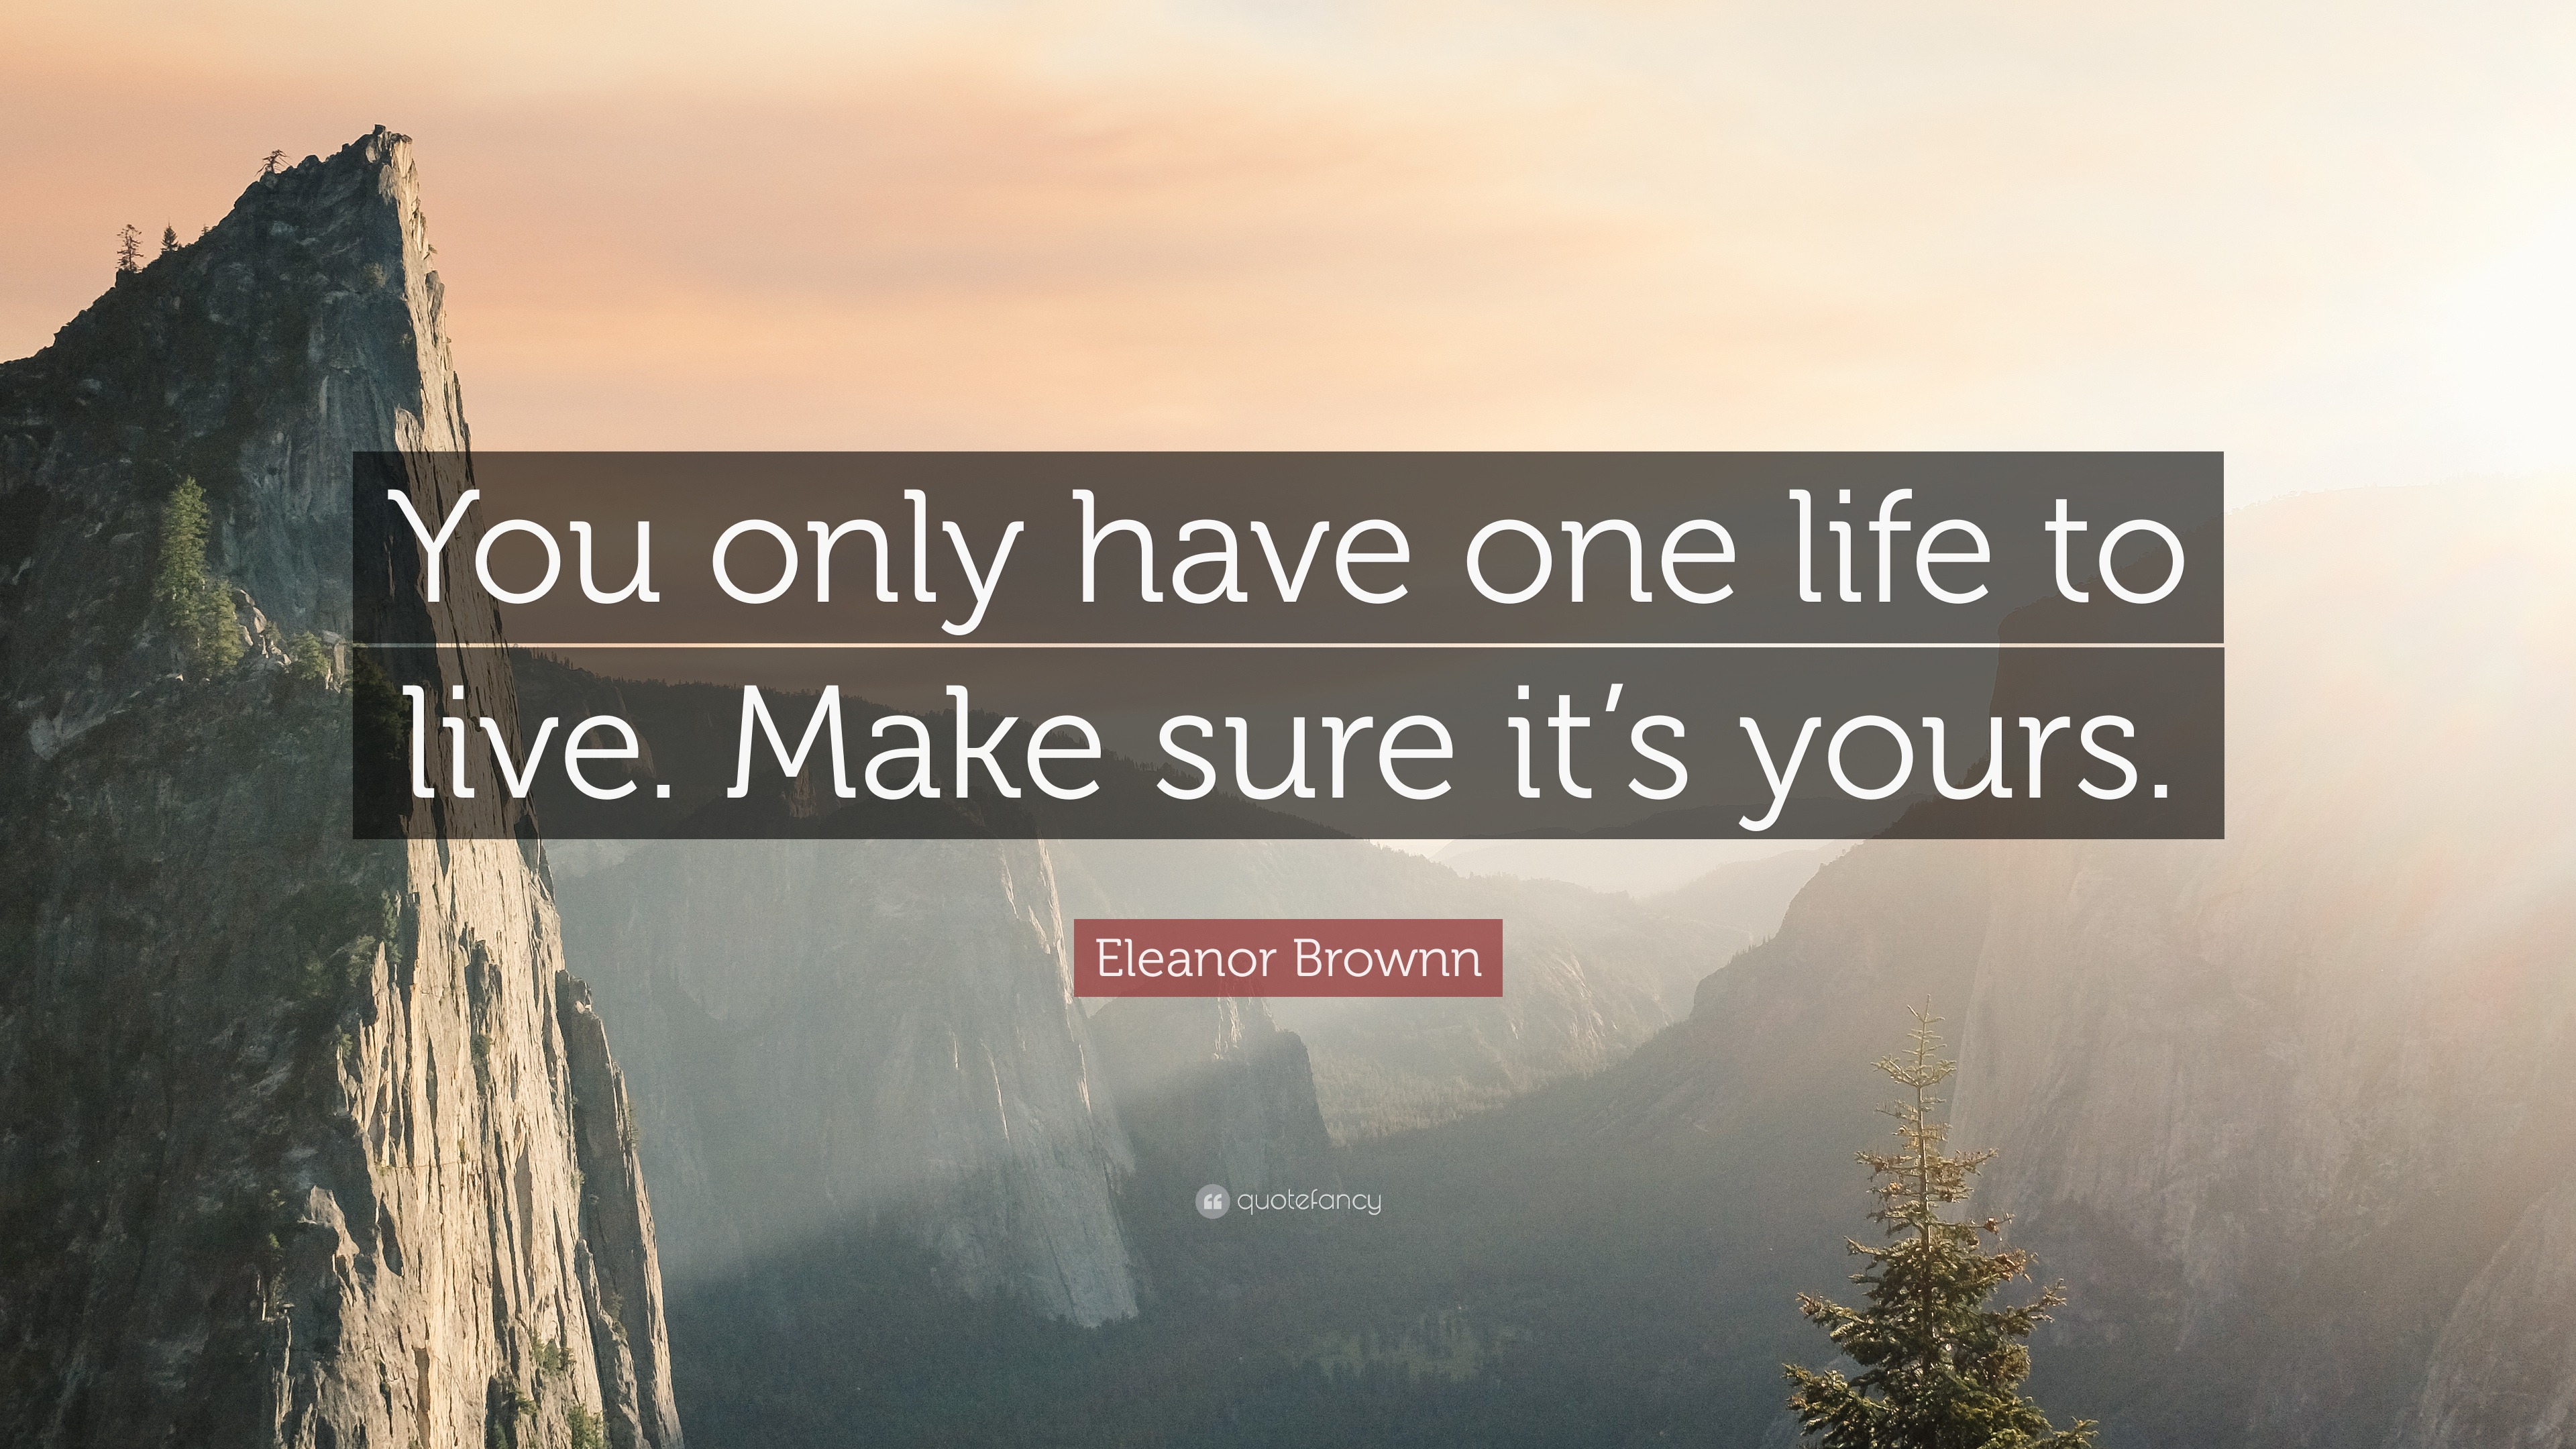 Eleanor Brownn Quote You Only Have One Life To Live Make Sure It S Yours